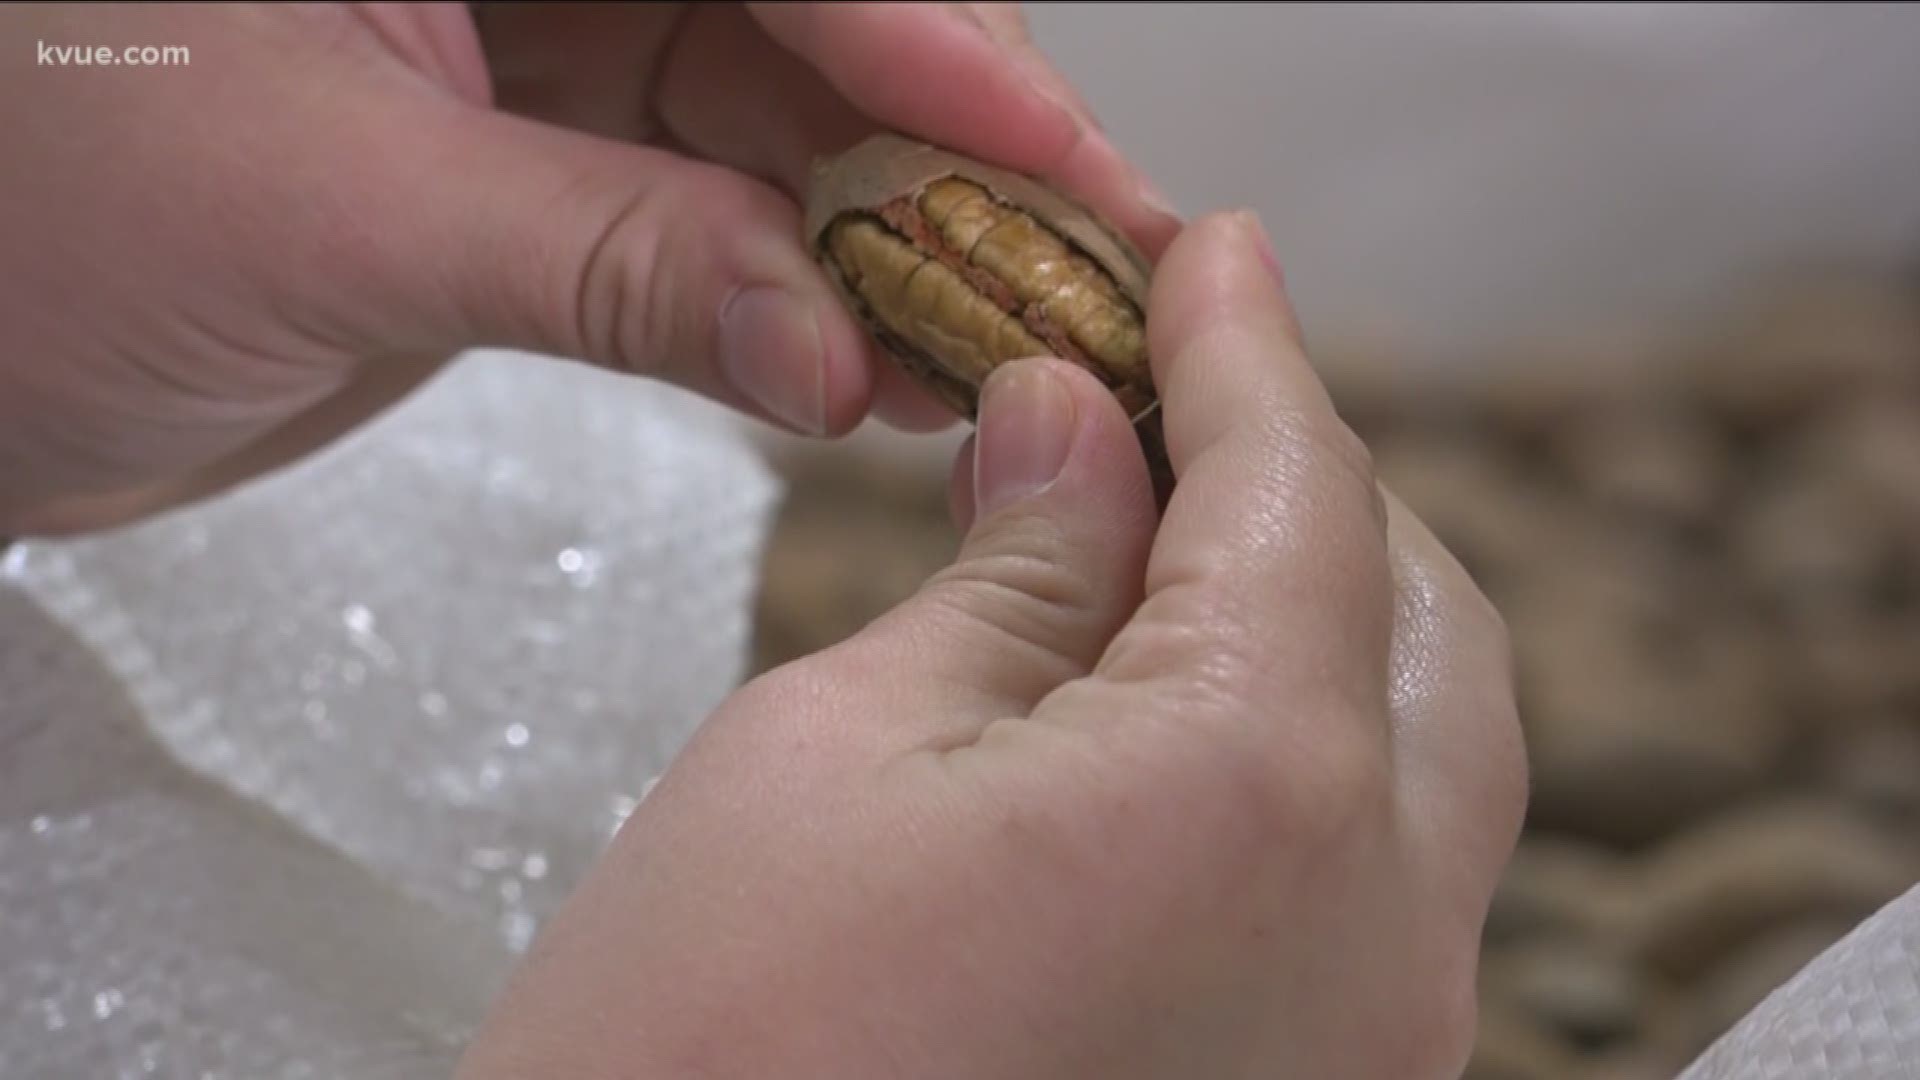 April 14 is National Pecan Day, and there's a company in Central Texas that has been celebrating since last week.